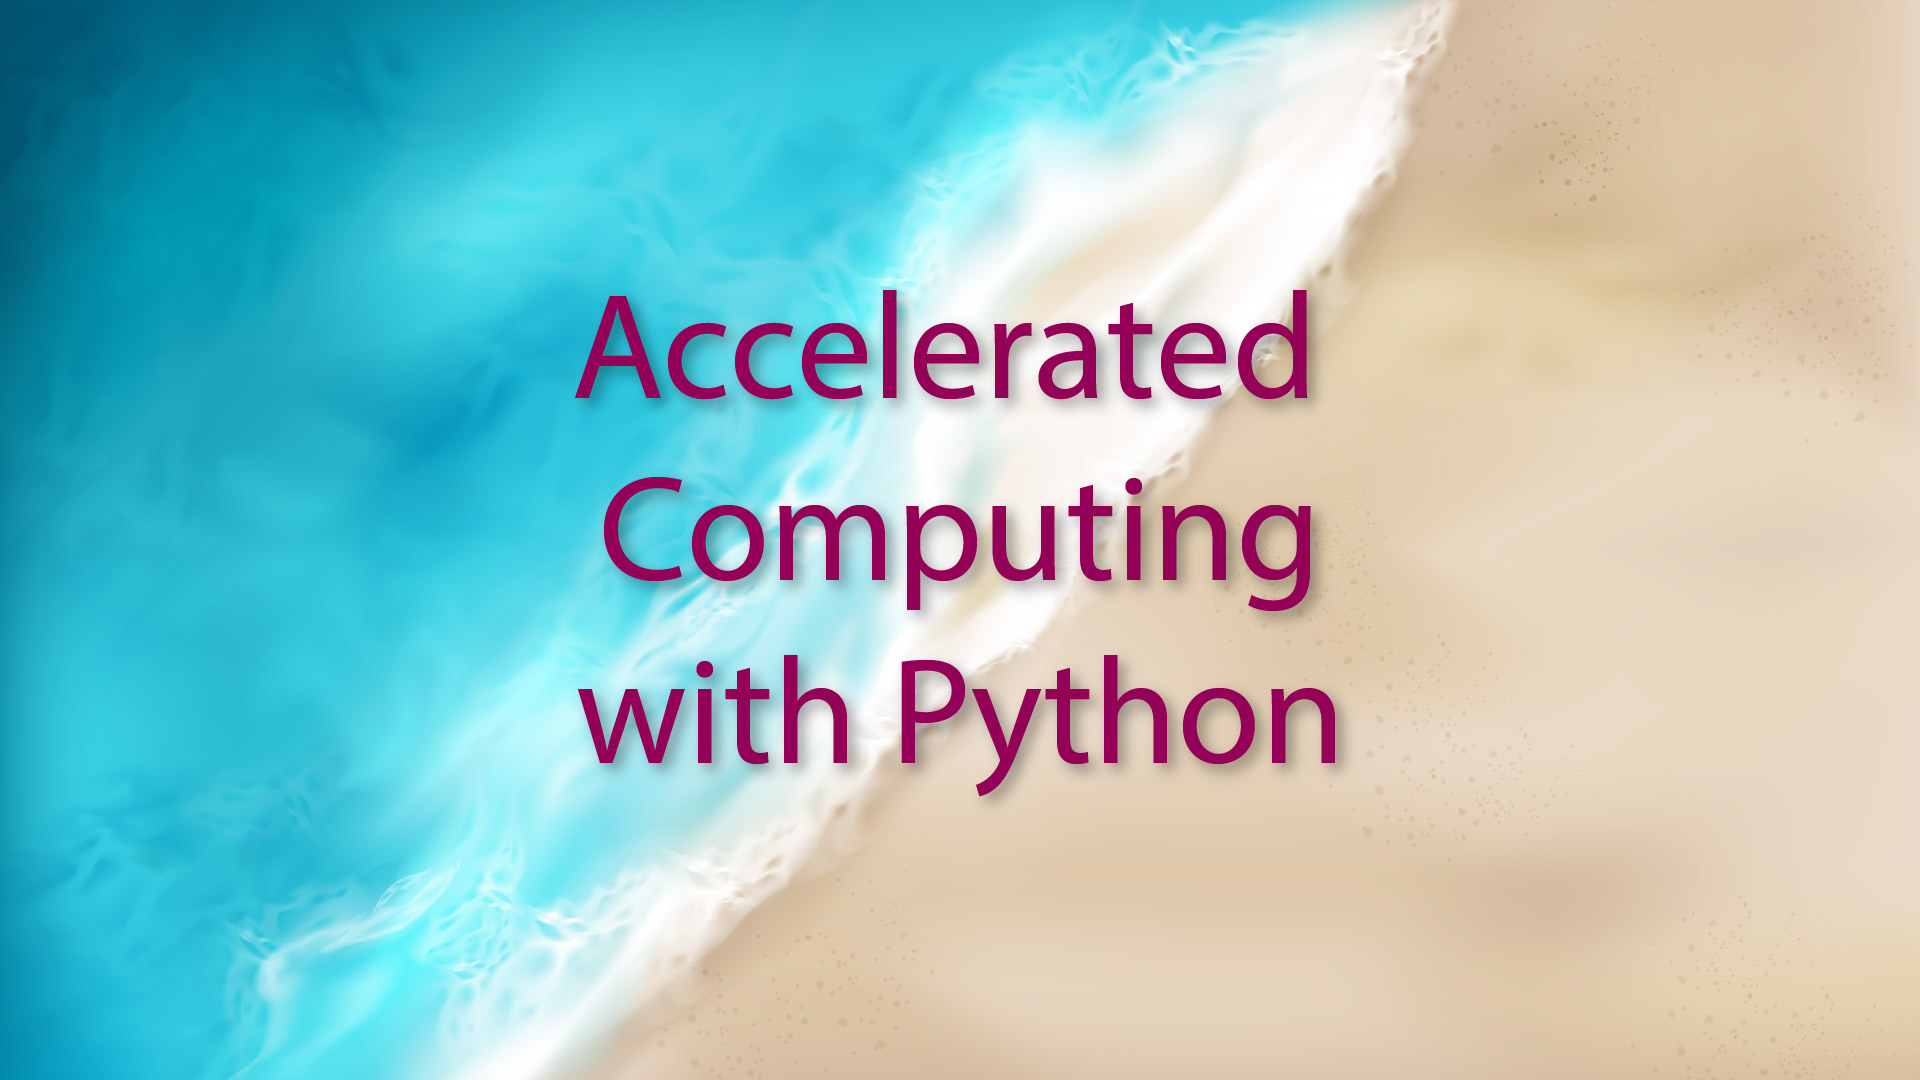 Accelerated computing with Python